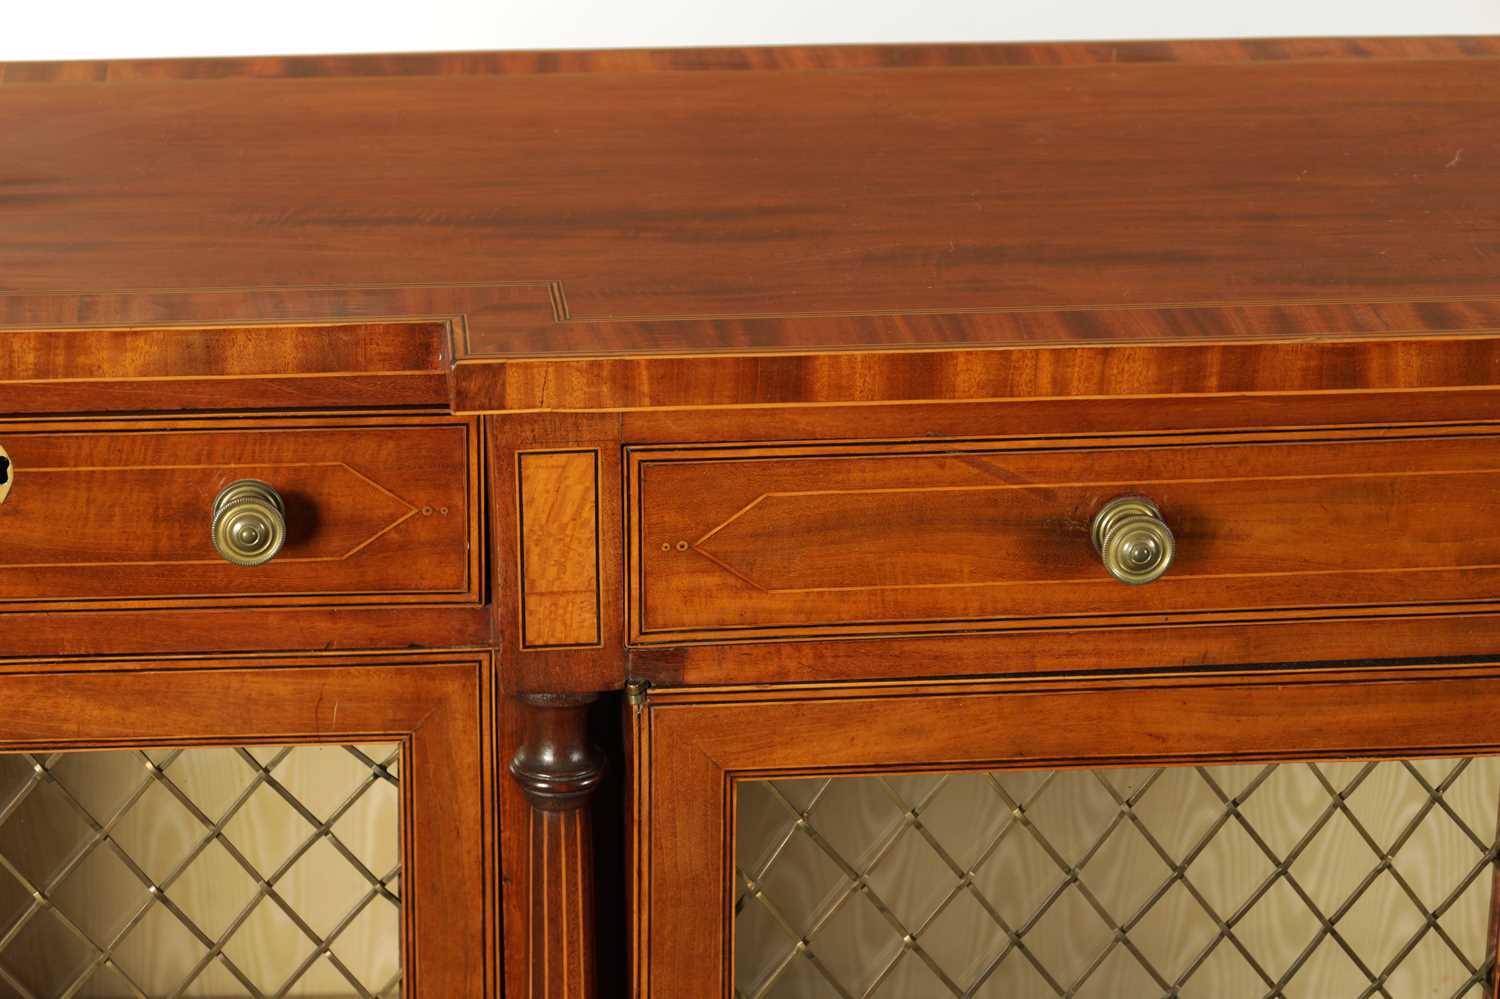 A FINE GEORGE III SATINWOOD BANDED AND INLAID FIGURED MAHOGANY BREAKFRONT SIDE CABINET - Image 2 of 6